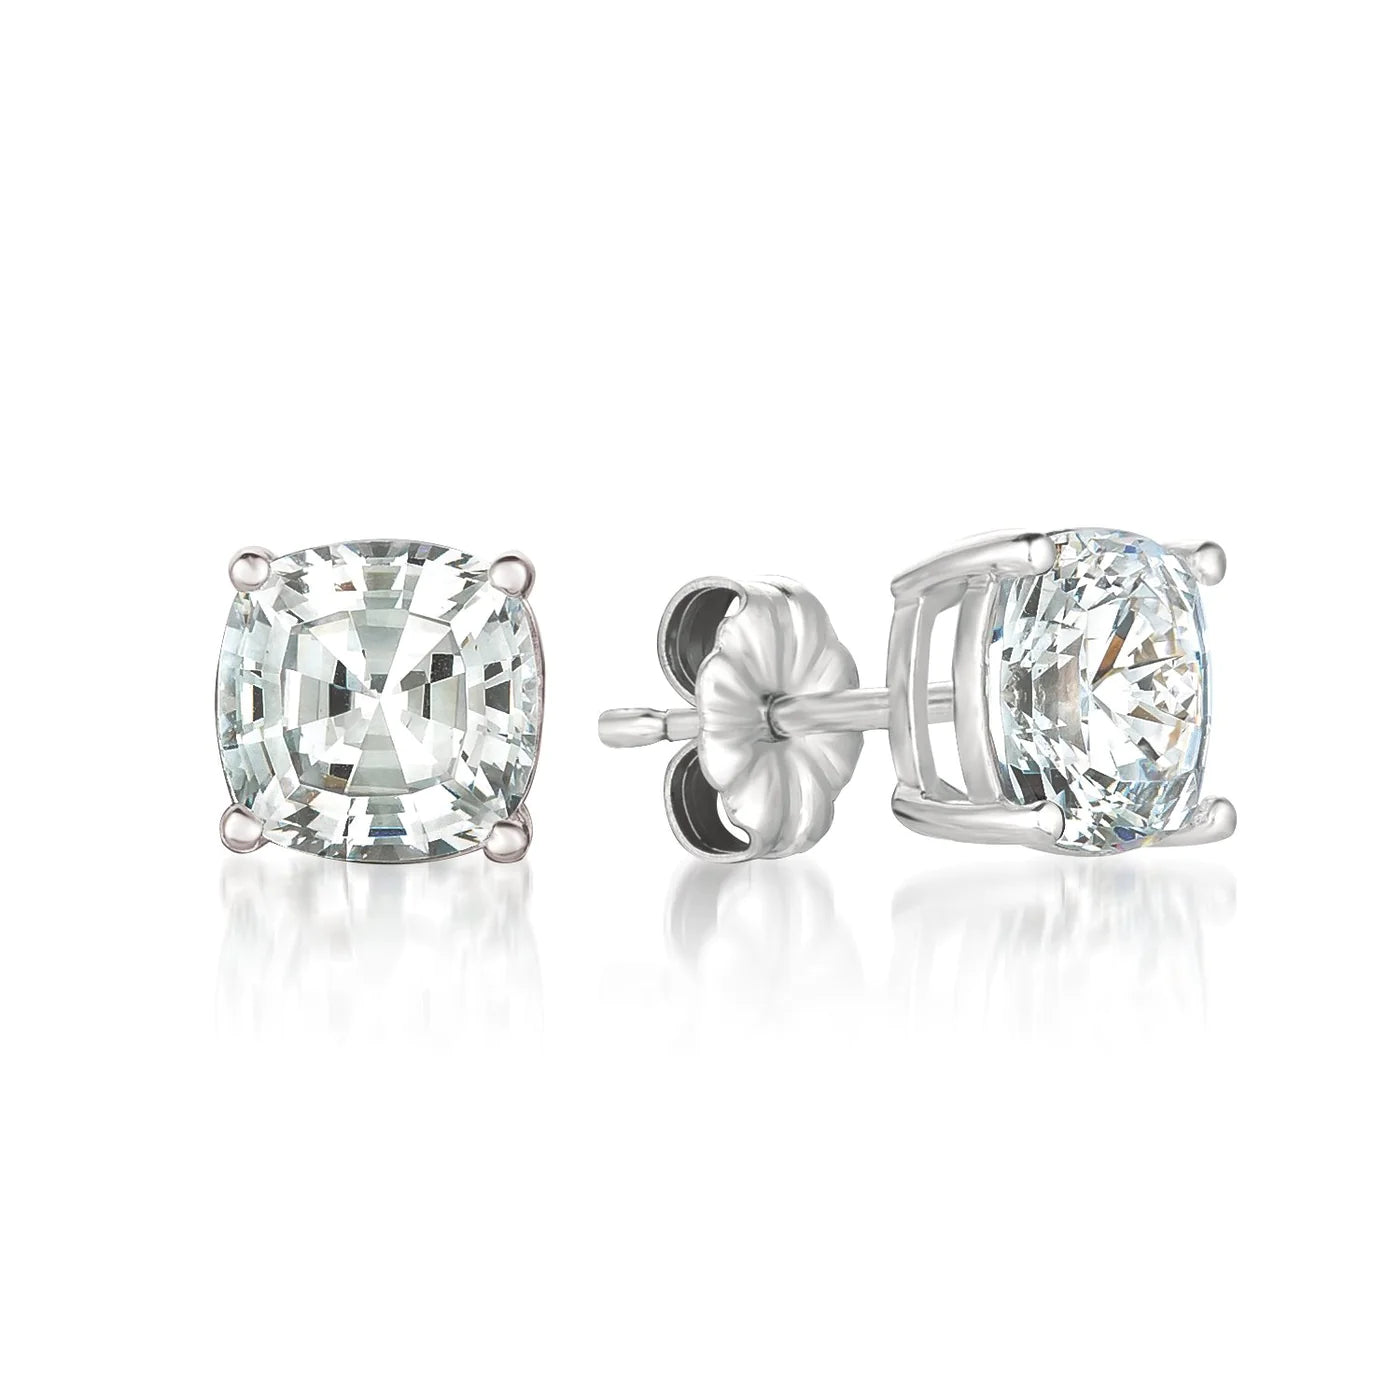 Soliatire Asscher Earrings Finished in Pure Platinum - 4.0 cttw